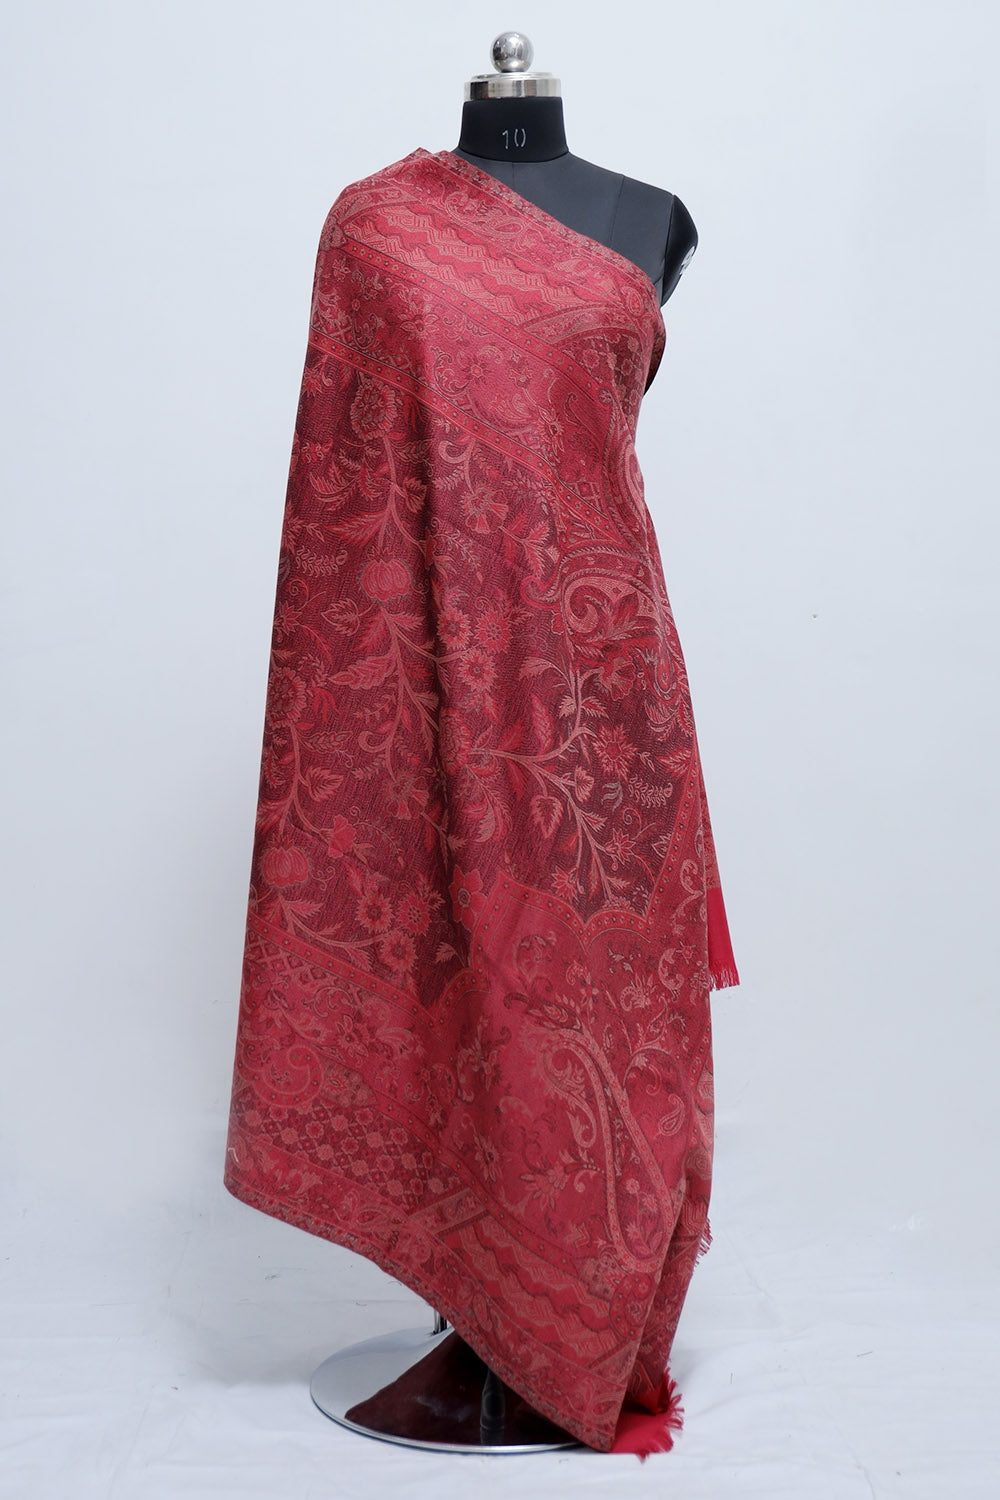 Dark pink Colour Jamawar Shawl With Highly Defined Borders